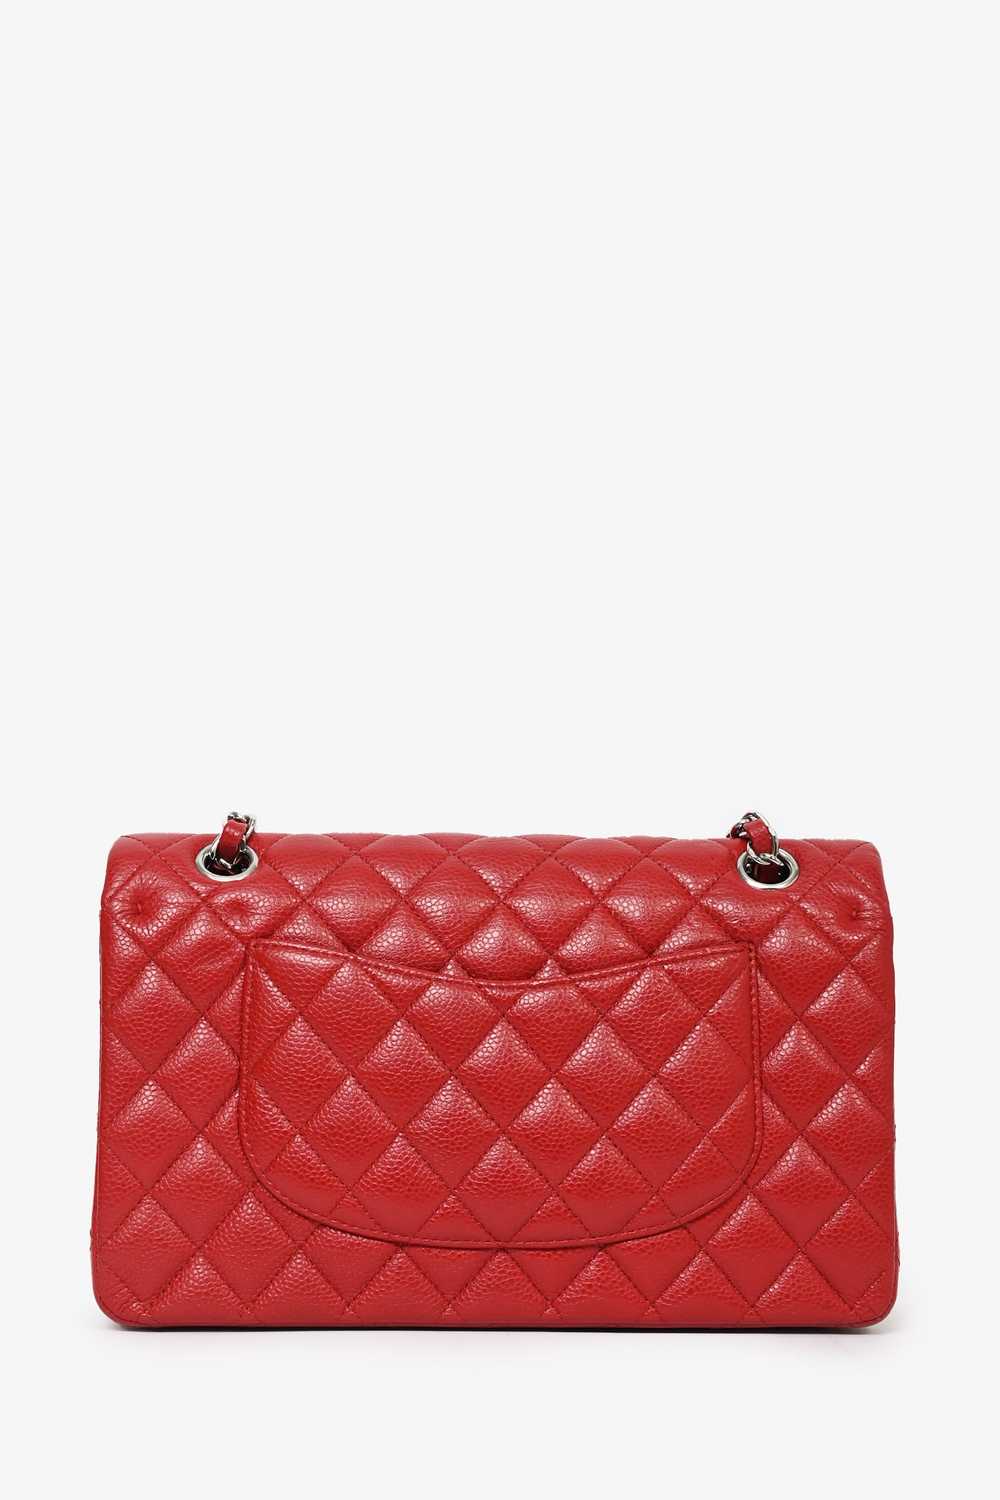 Pre-loved Chanel™ 2011 Red Caviar Leather Medium … - image 4